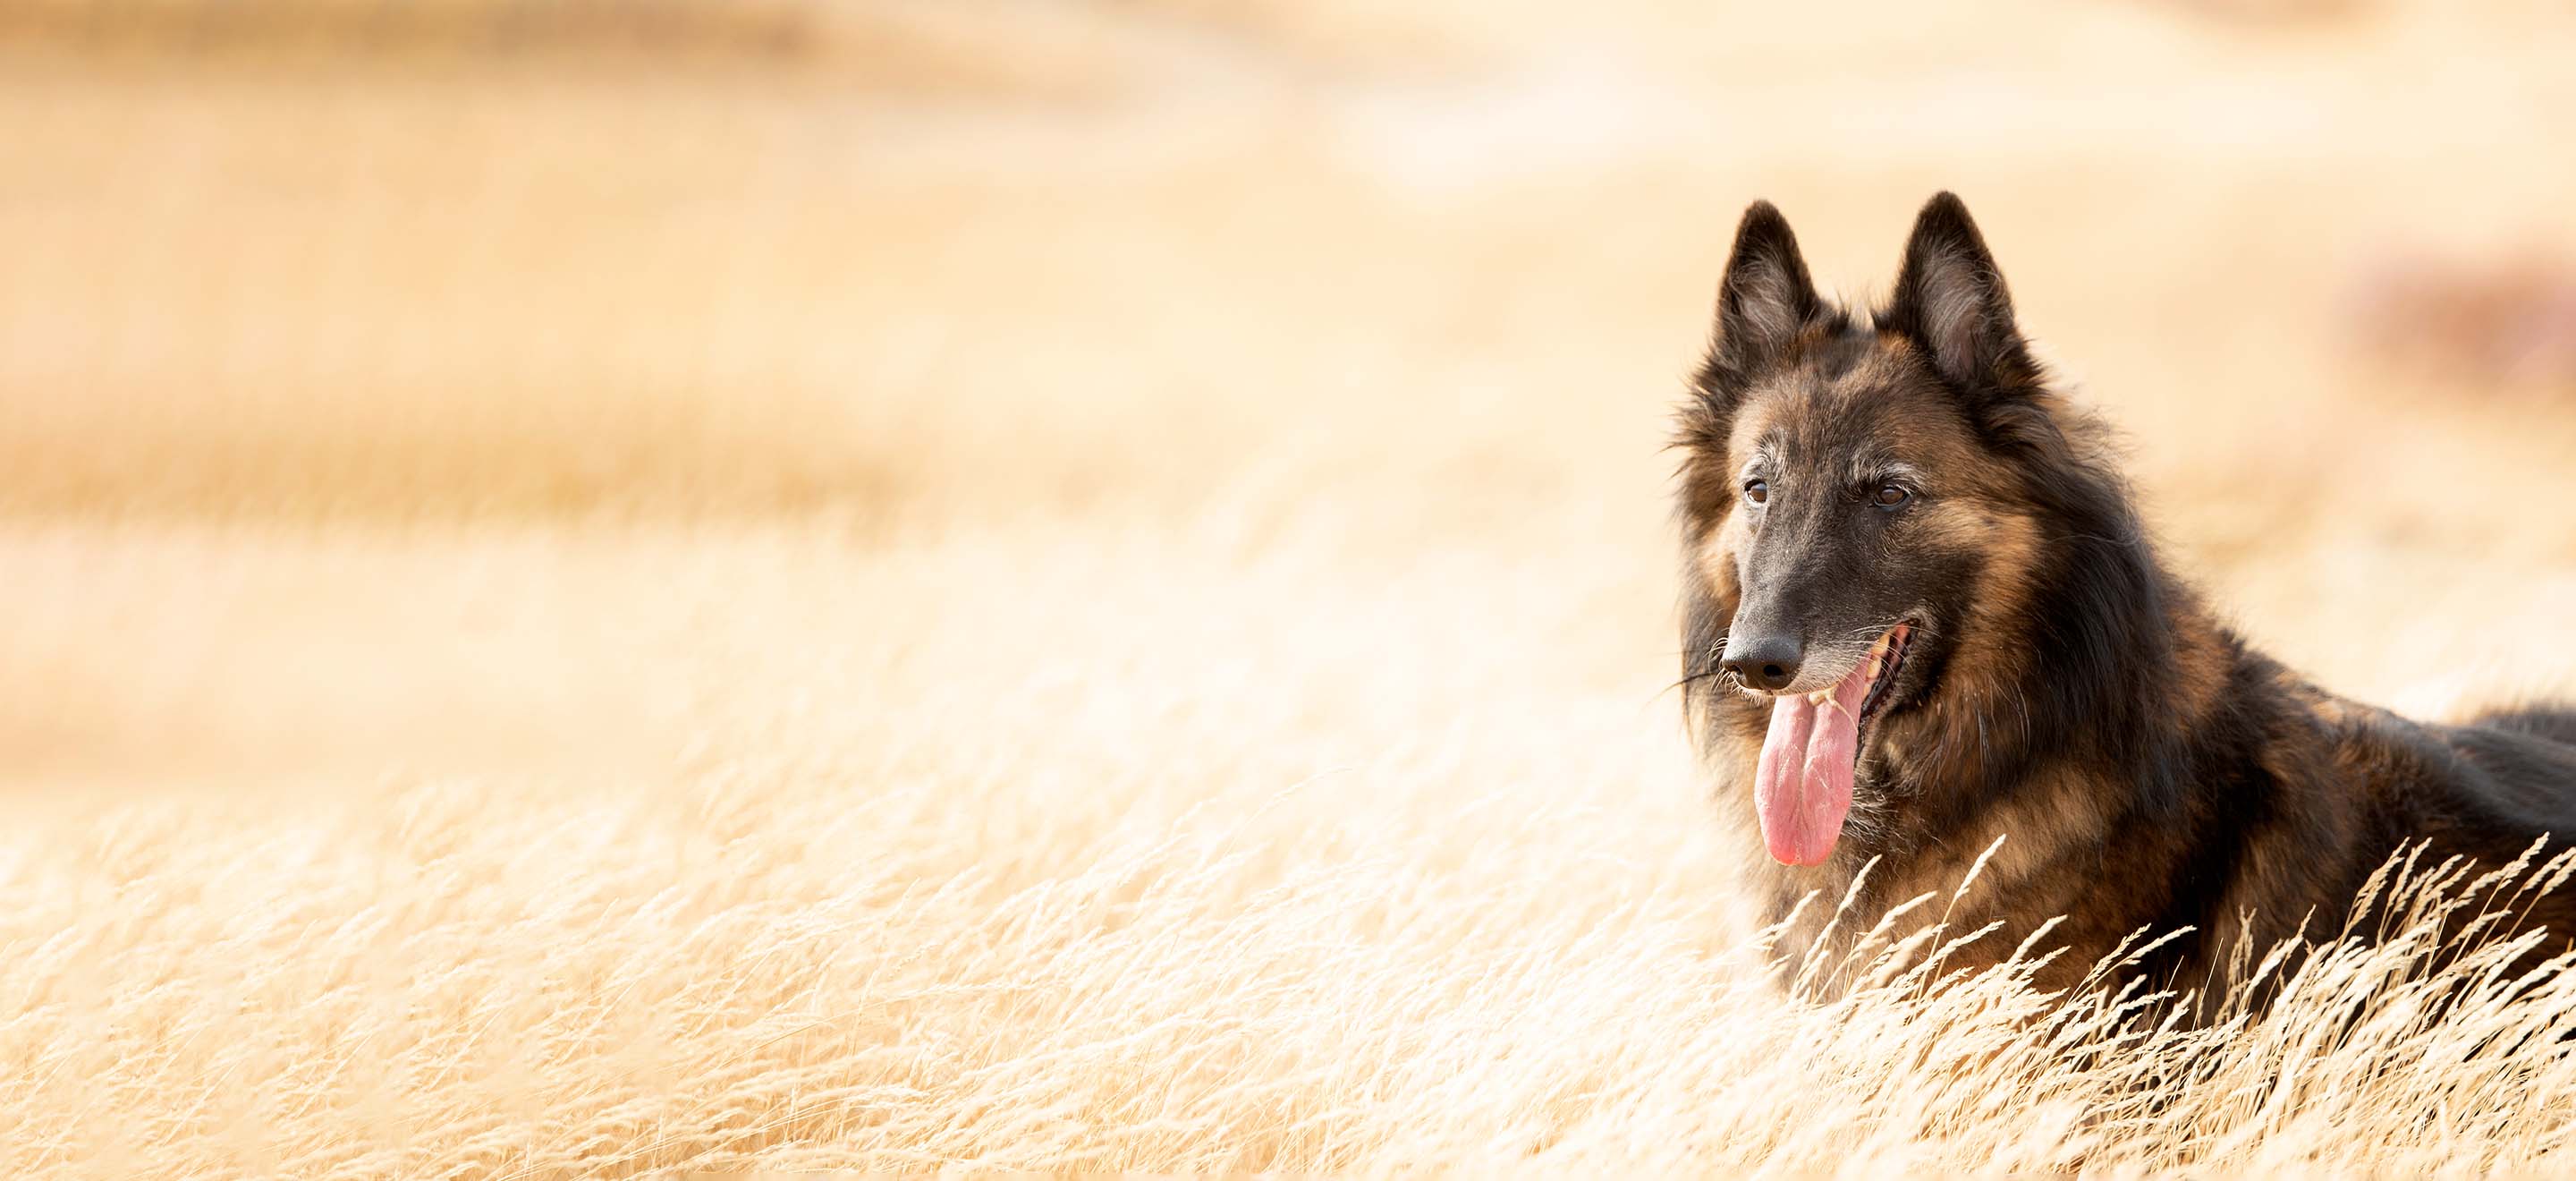 A Belgian Tervuren dog standing in a wheat field smiling image